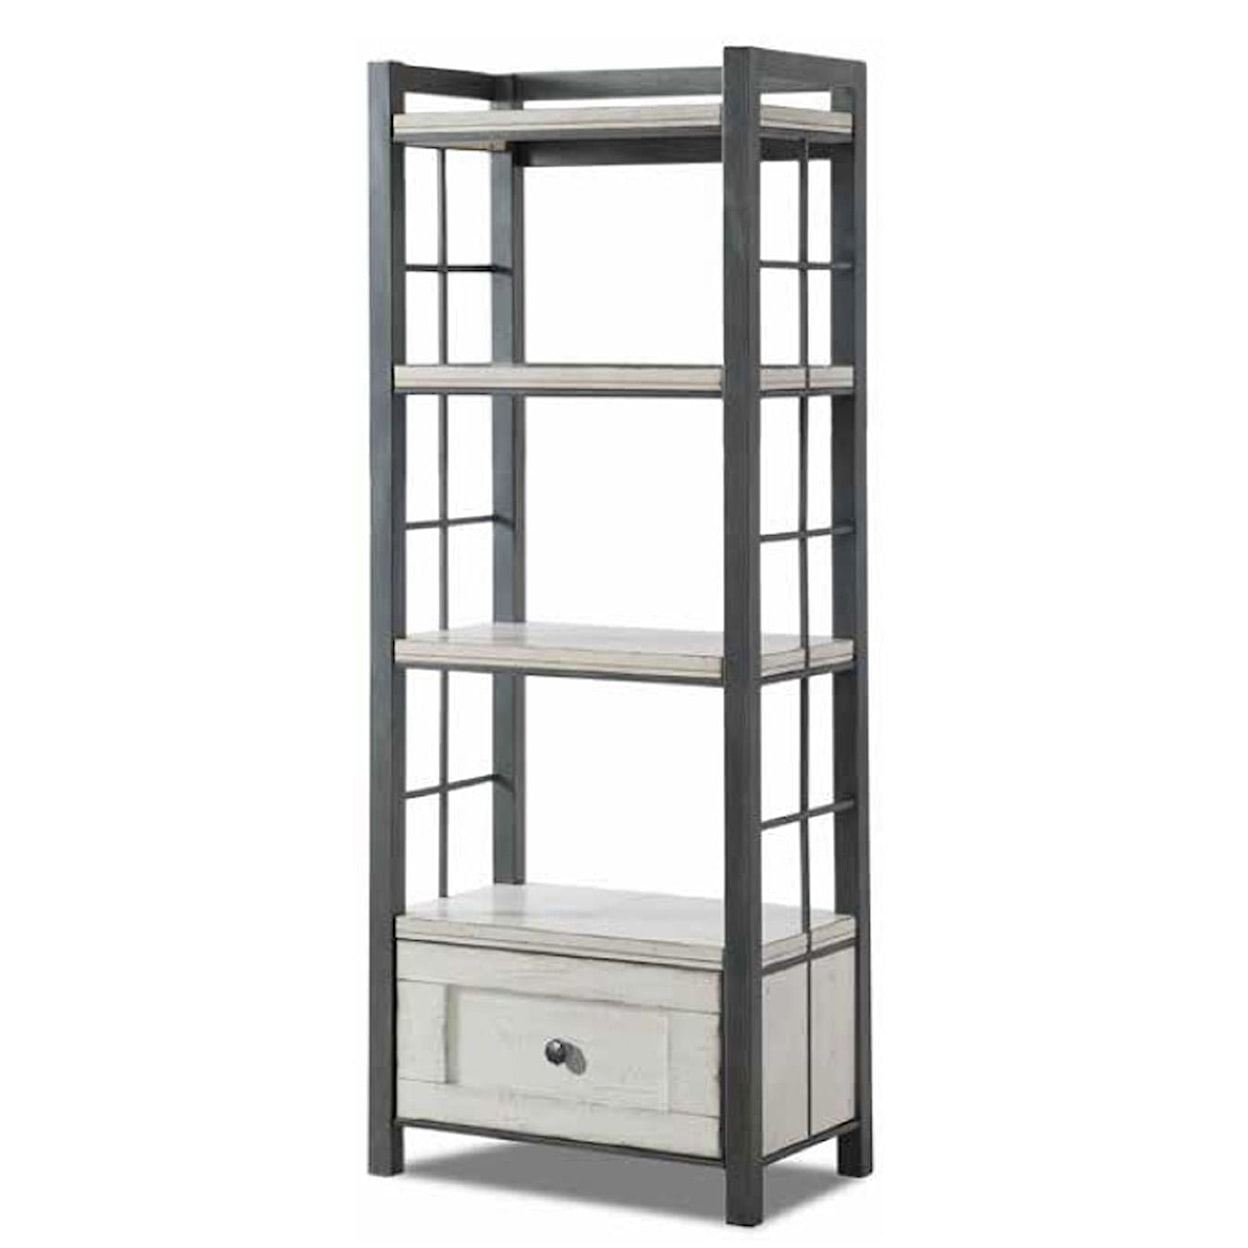 Trisha Yearwood Home Collection by Legacy Classic Coming Home Etagere